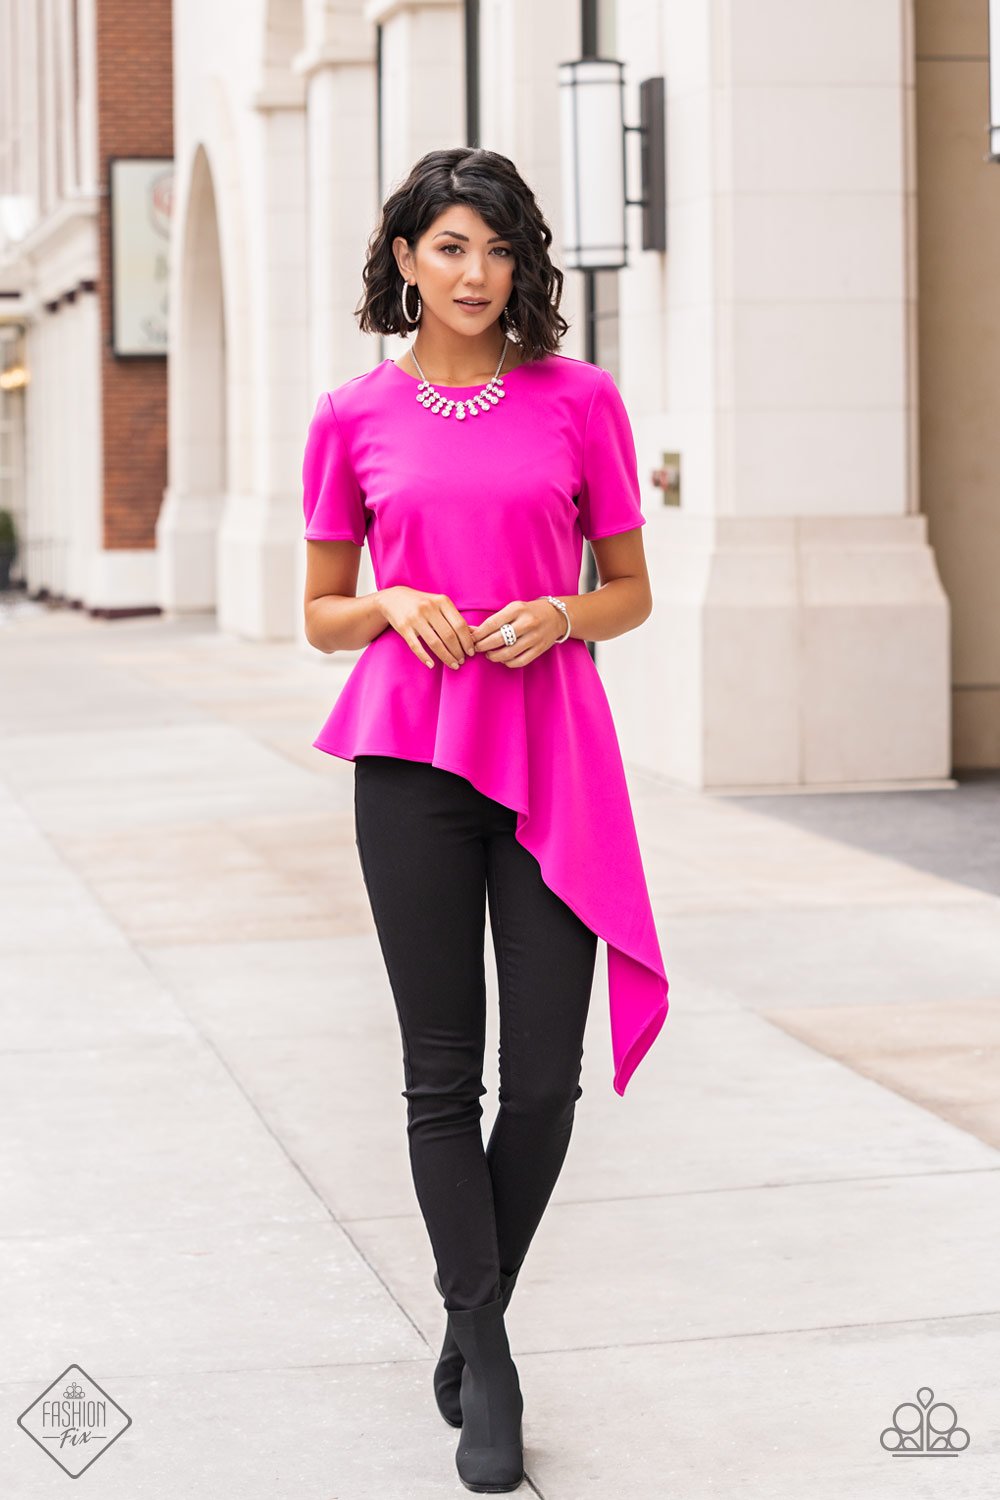 Fiercely 5th Avenue - Complete Trend Blend - February 2021 Fashion Fix Paparazzi